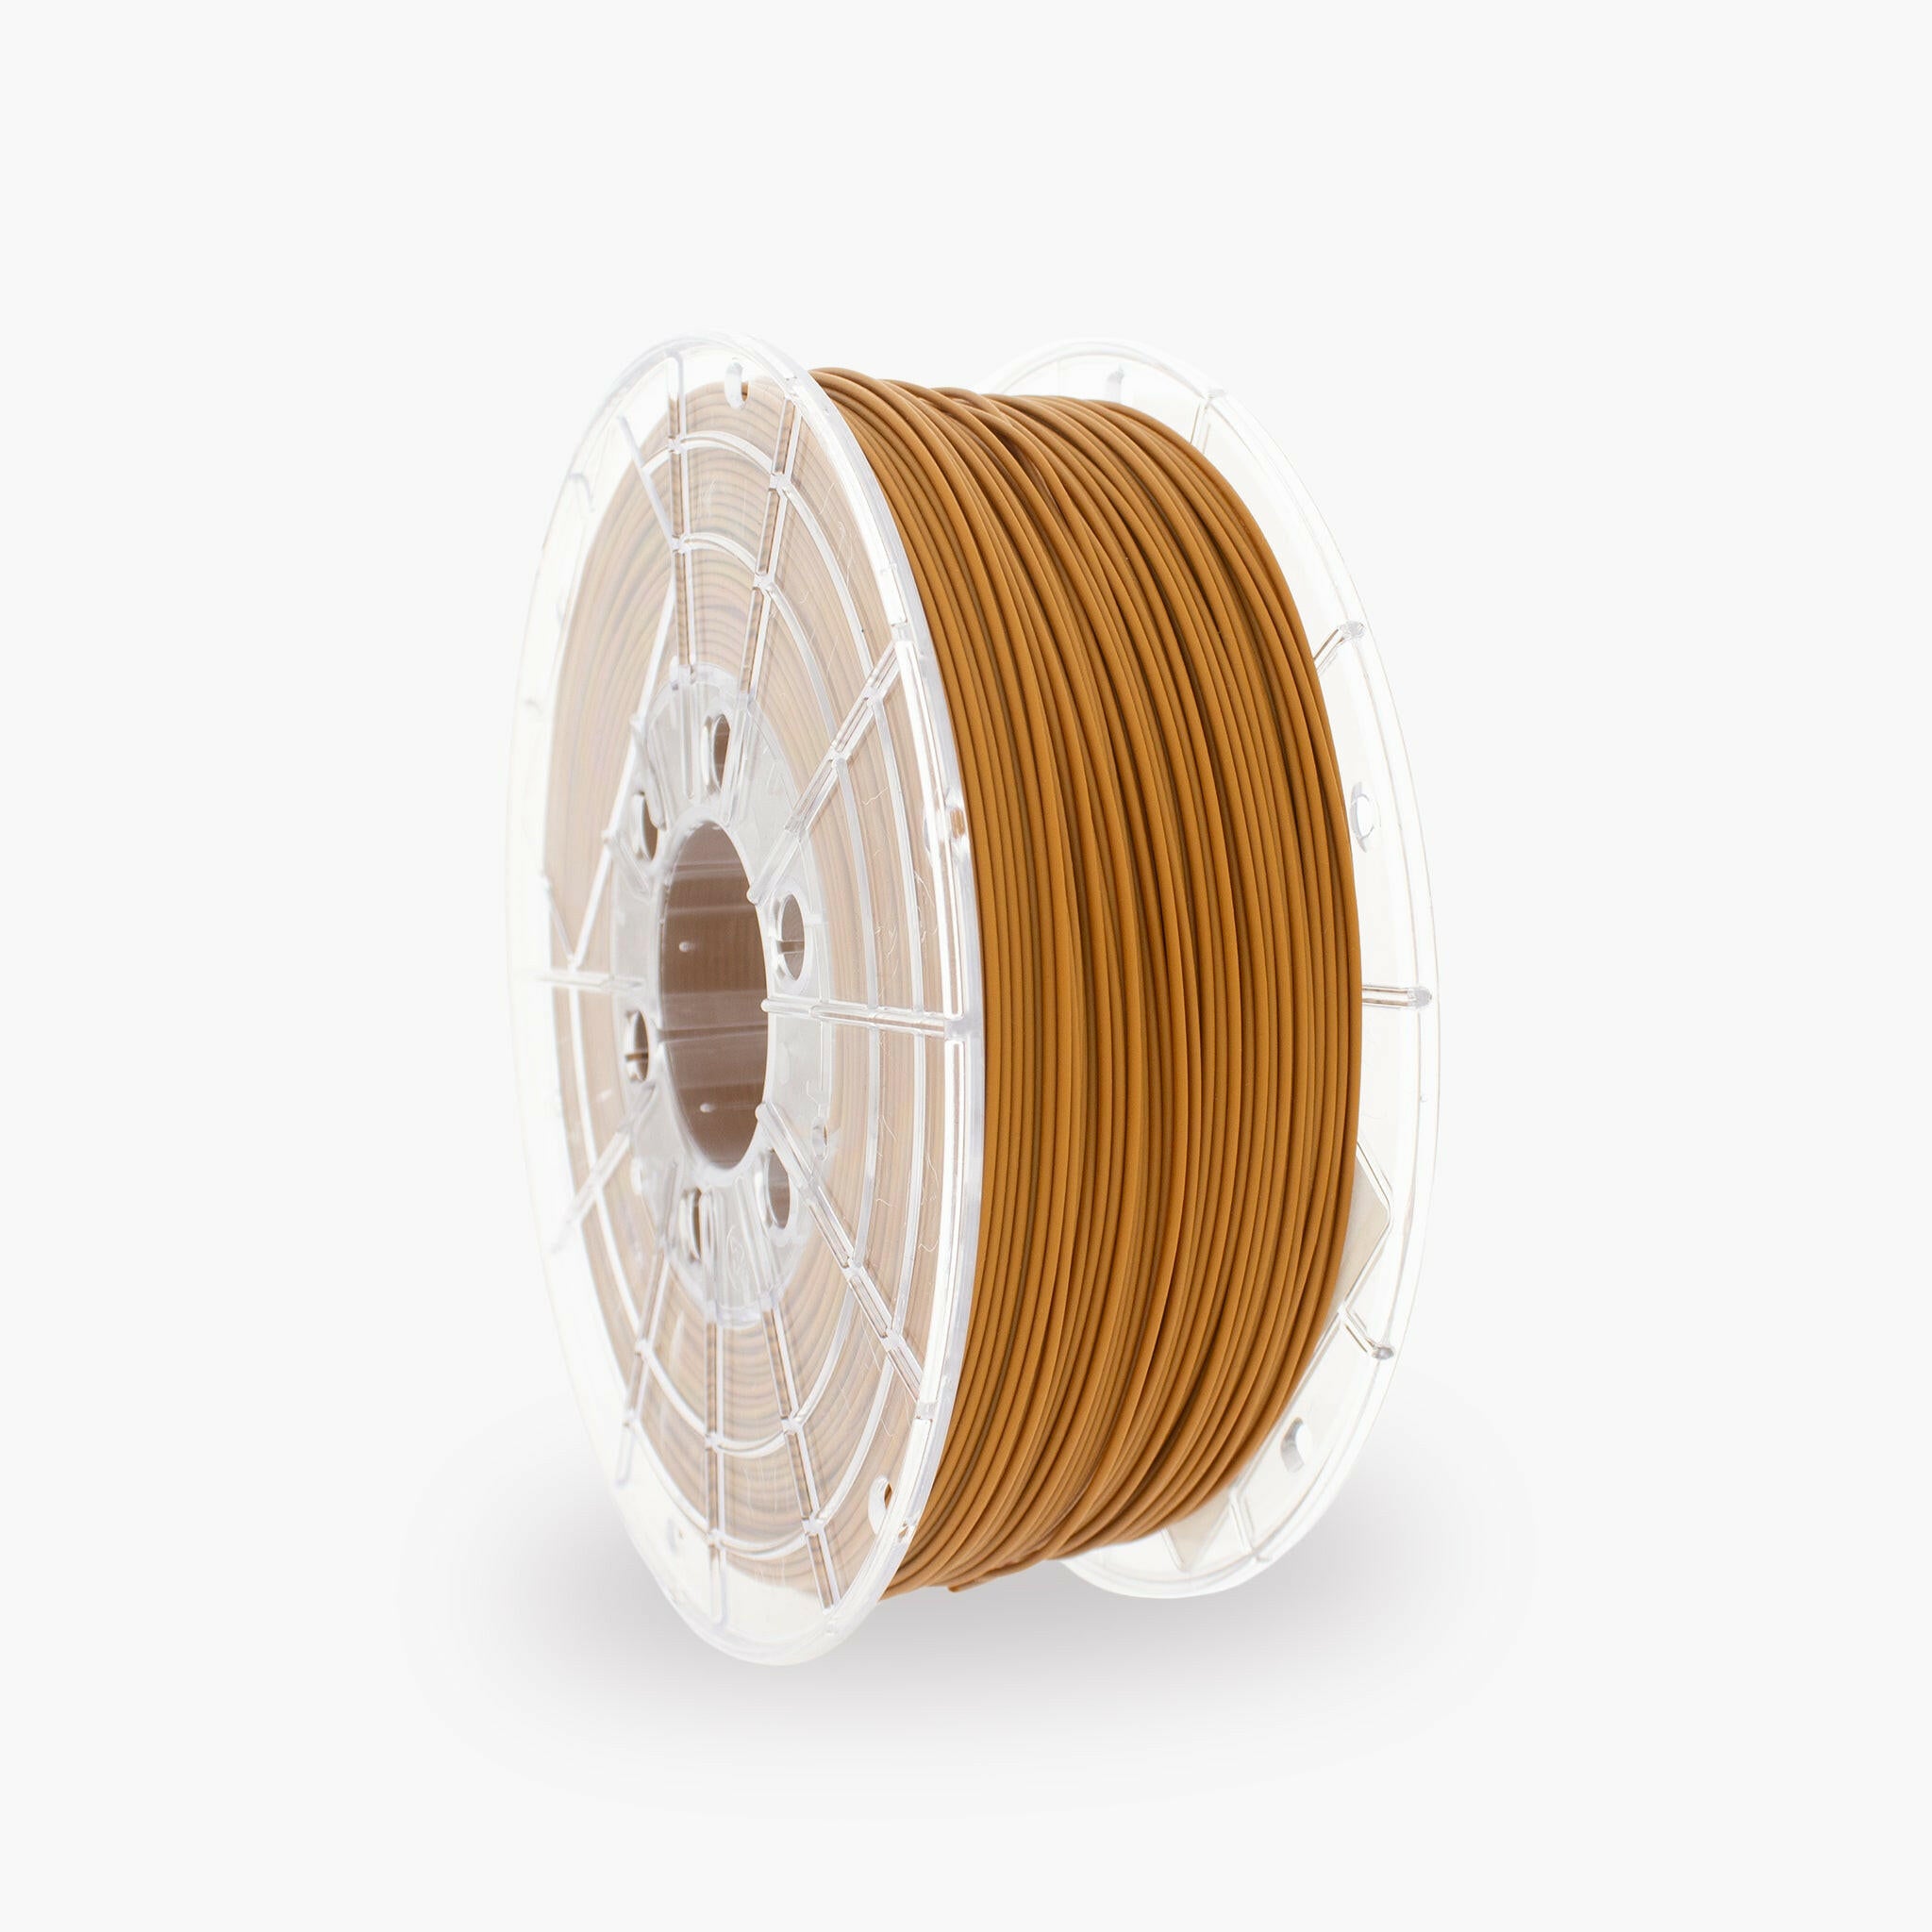 Ocher Brown PLA 3D Printer Filament with a diameter of 1.75mm on a 1KG Spool.